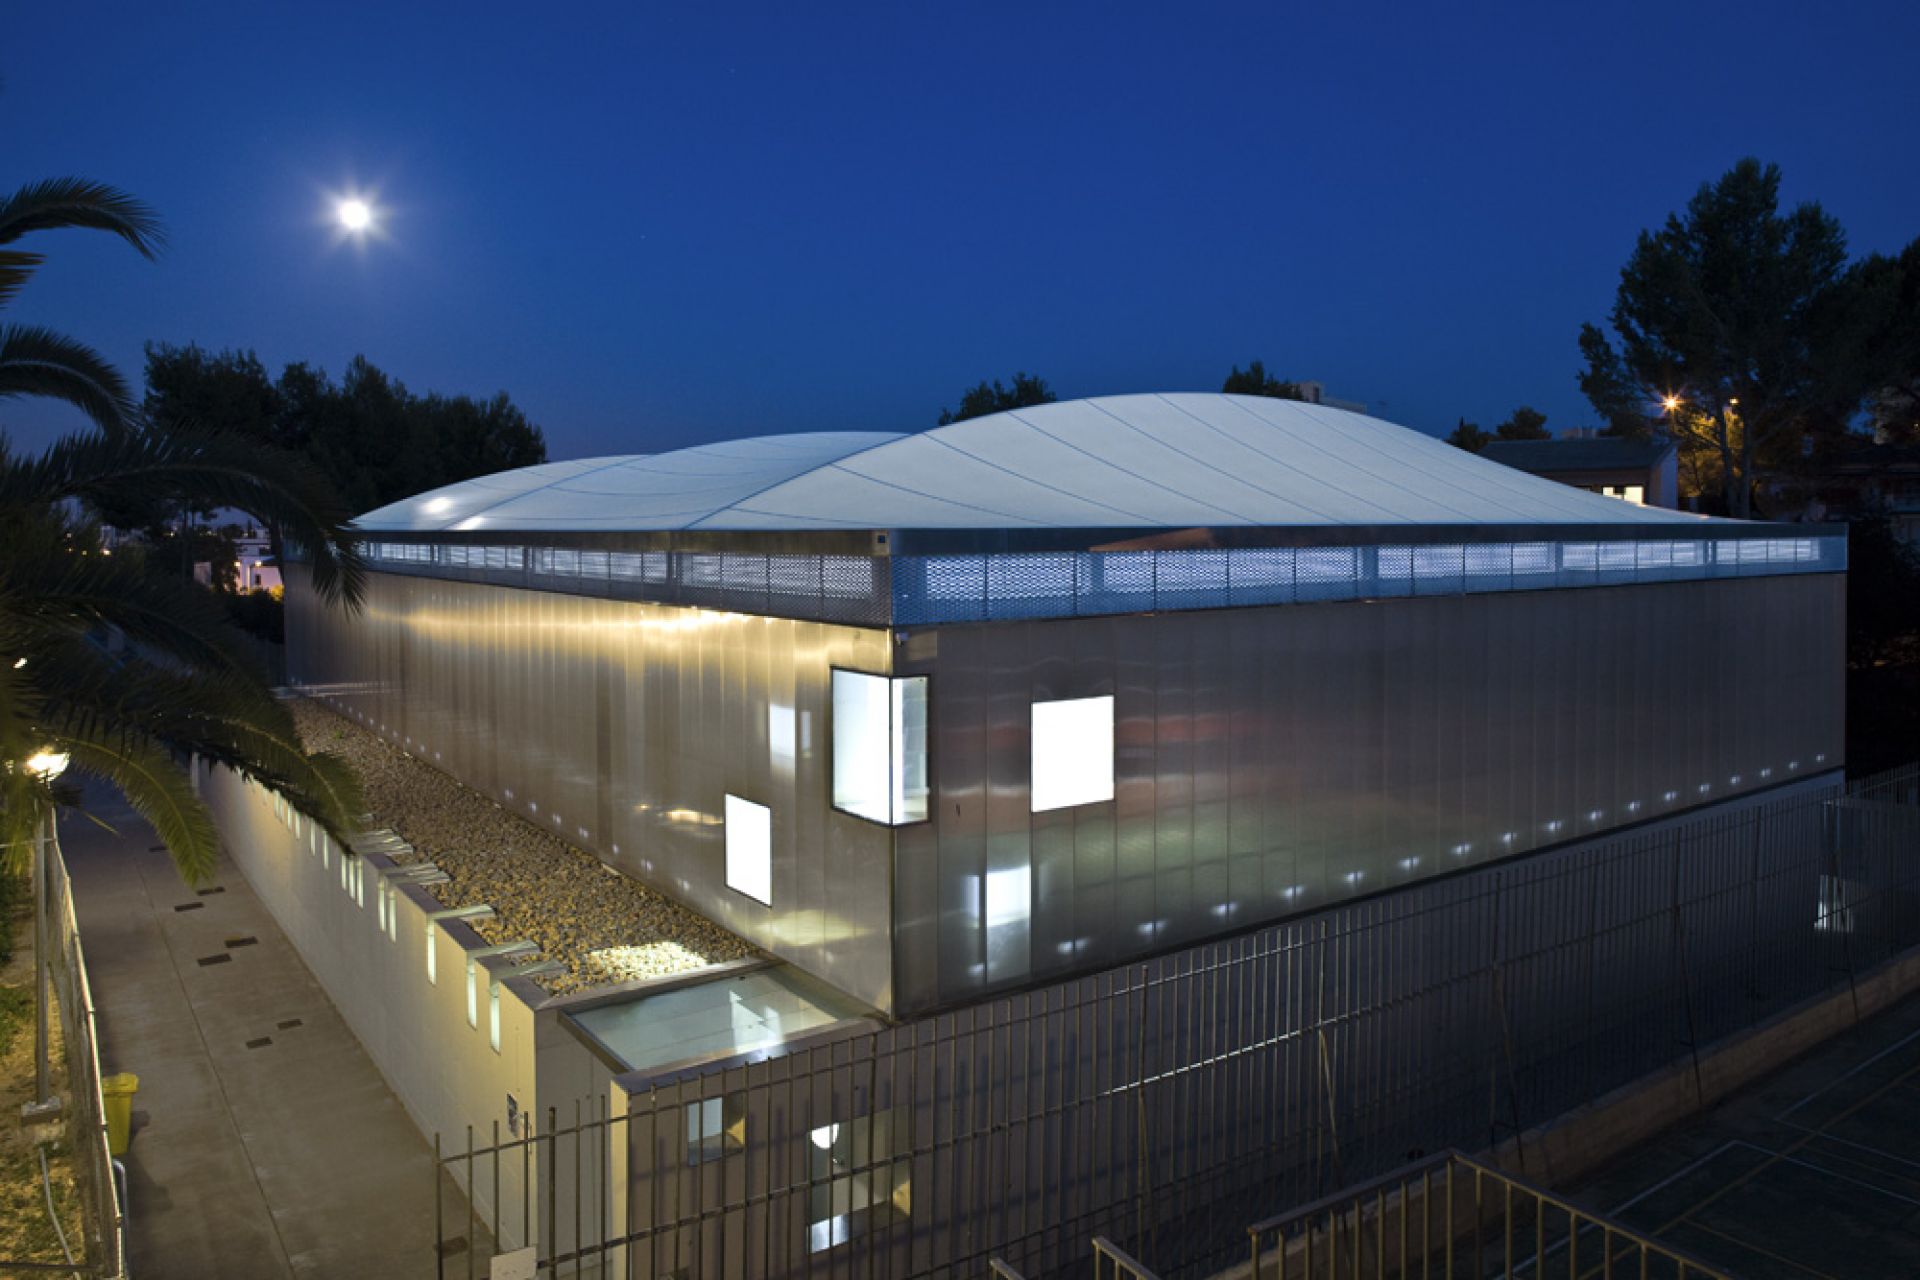 night image of the exterior of the sports center cover